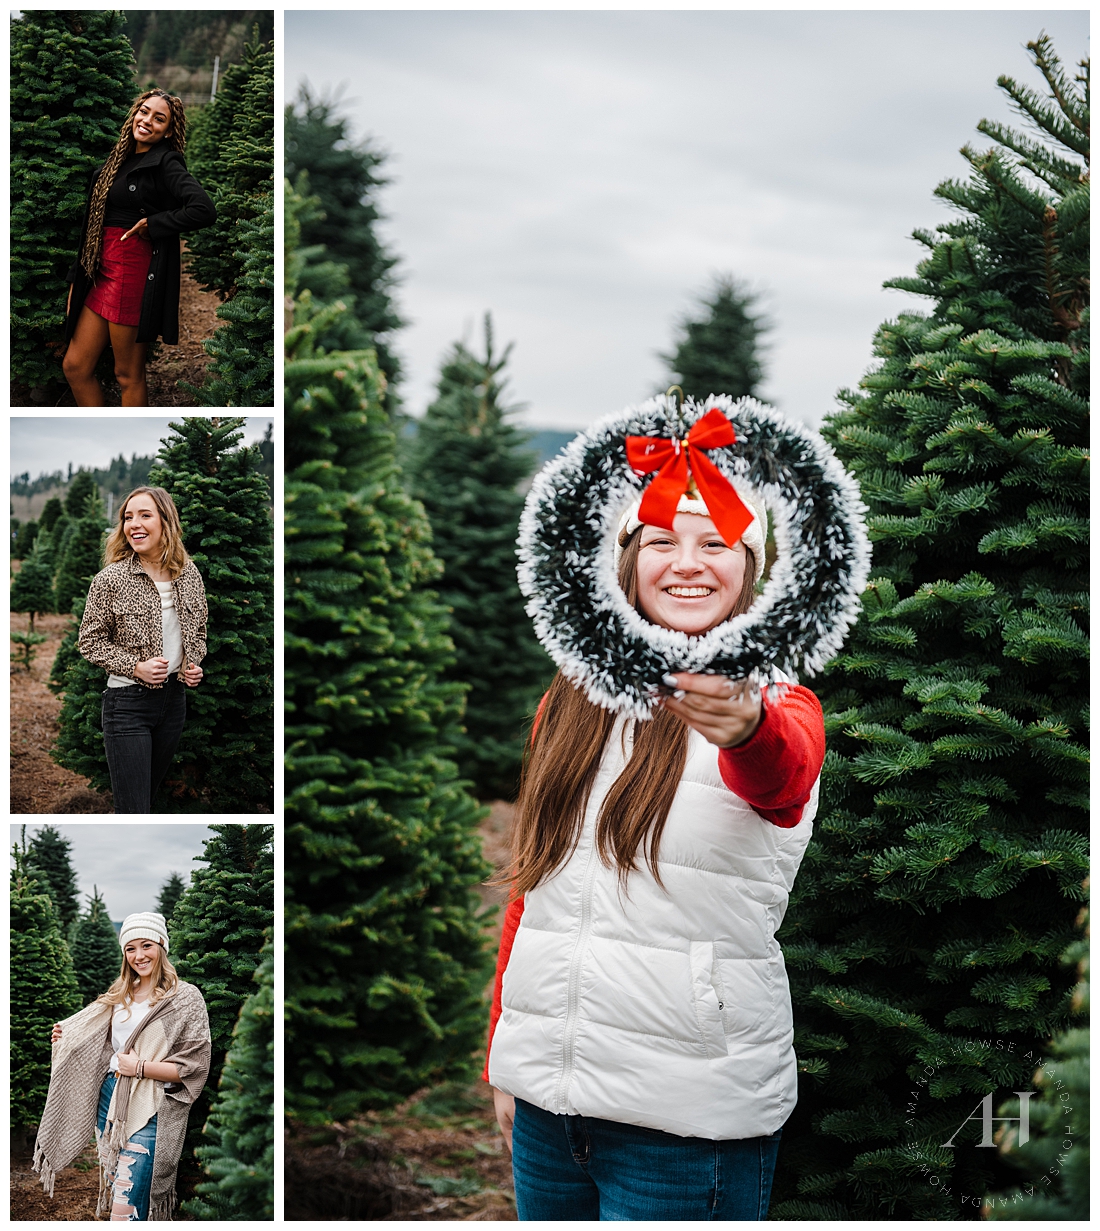 Fun Pose Ideas for Christmas Portraits with Wreath and Christmas Trees Photographed by Tacoma Senior Photographer Amanda Howse